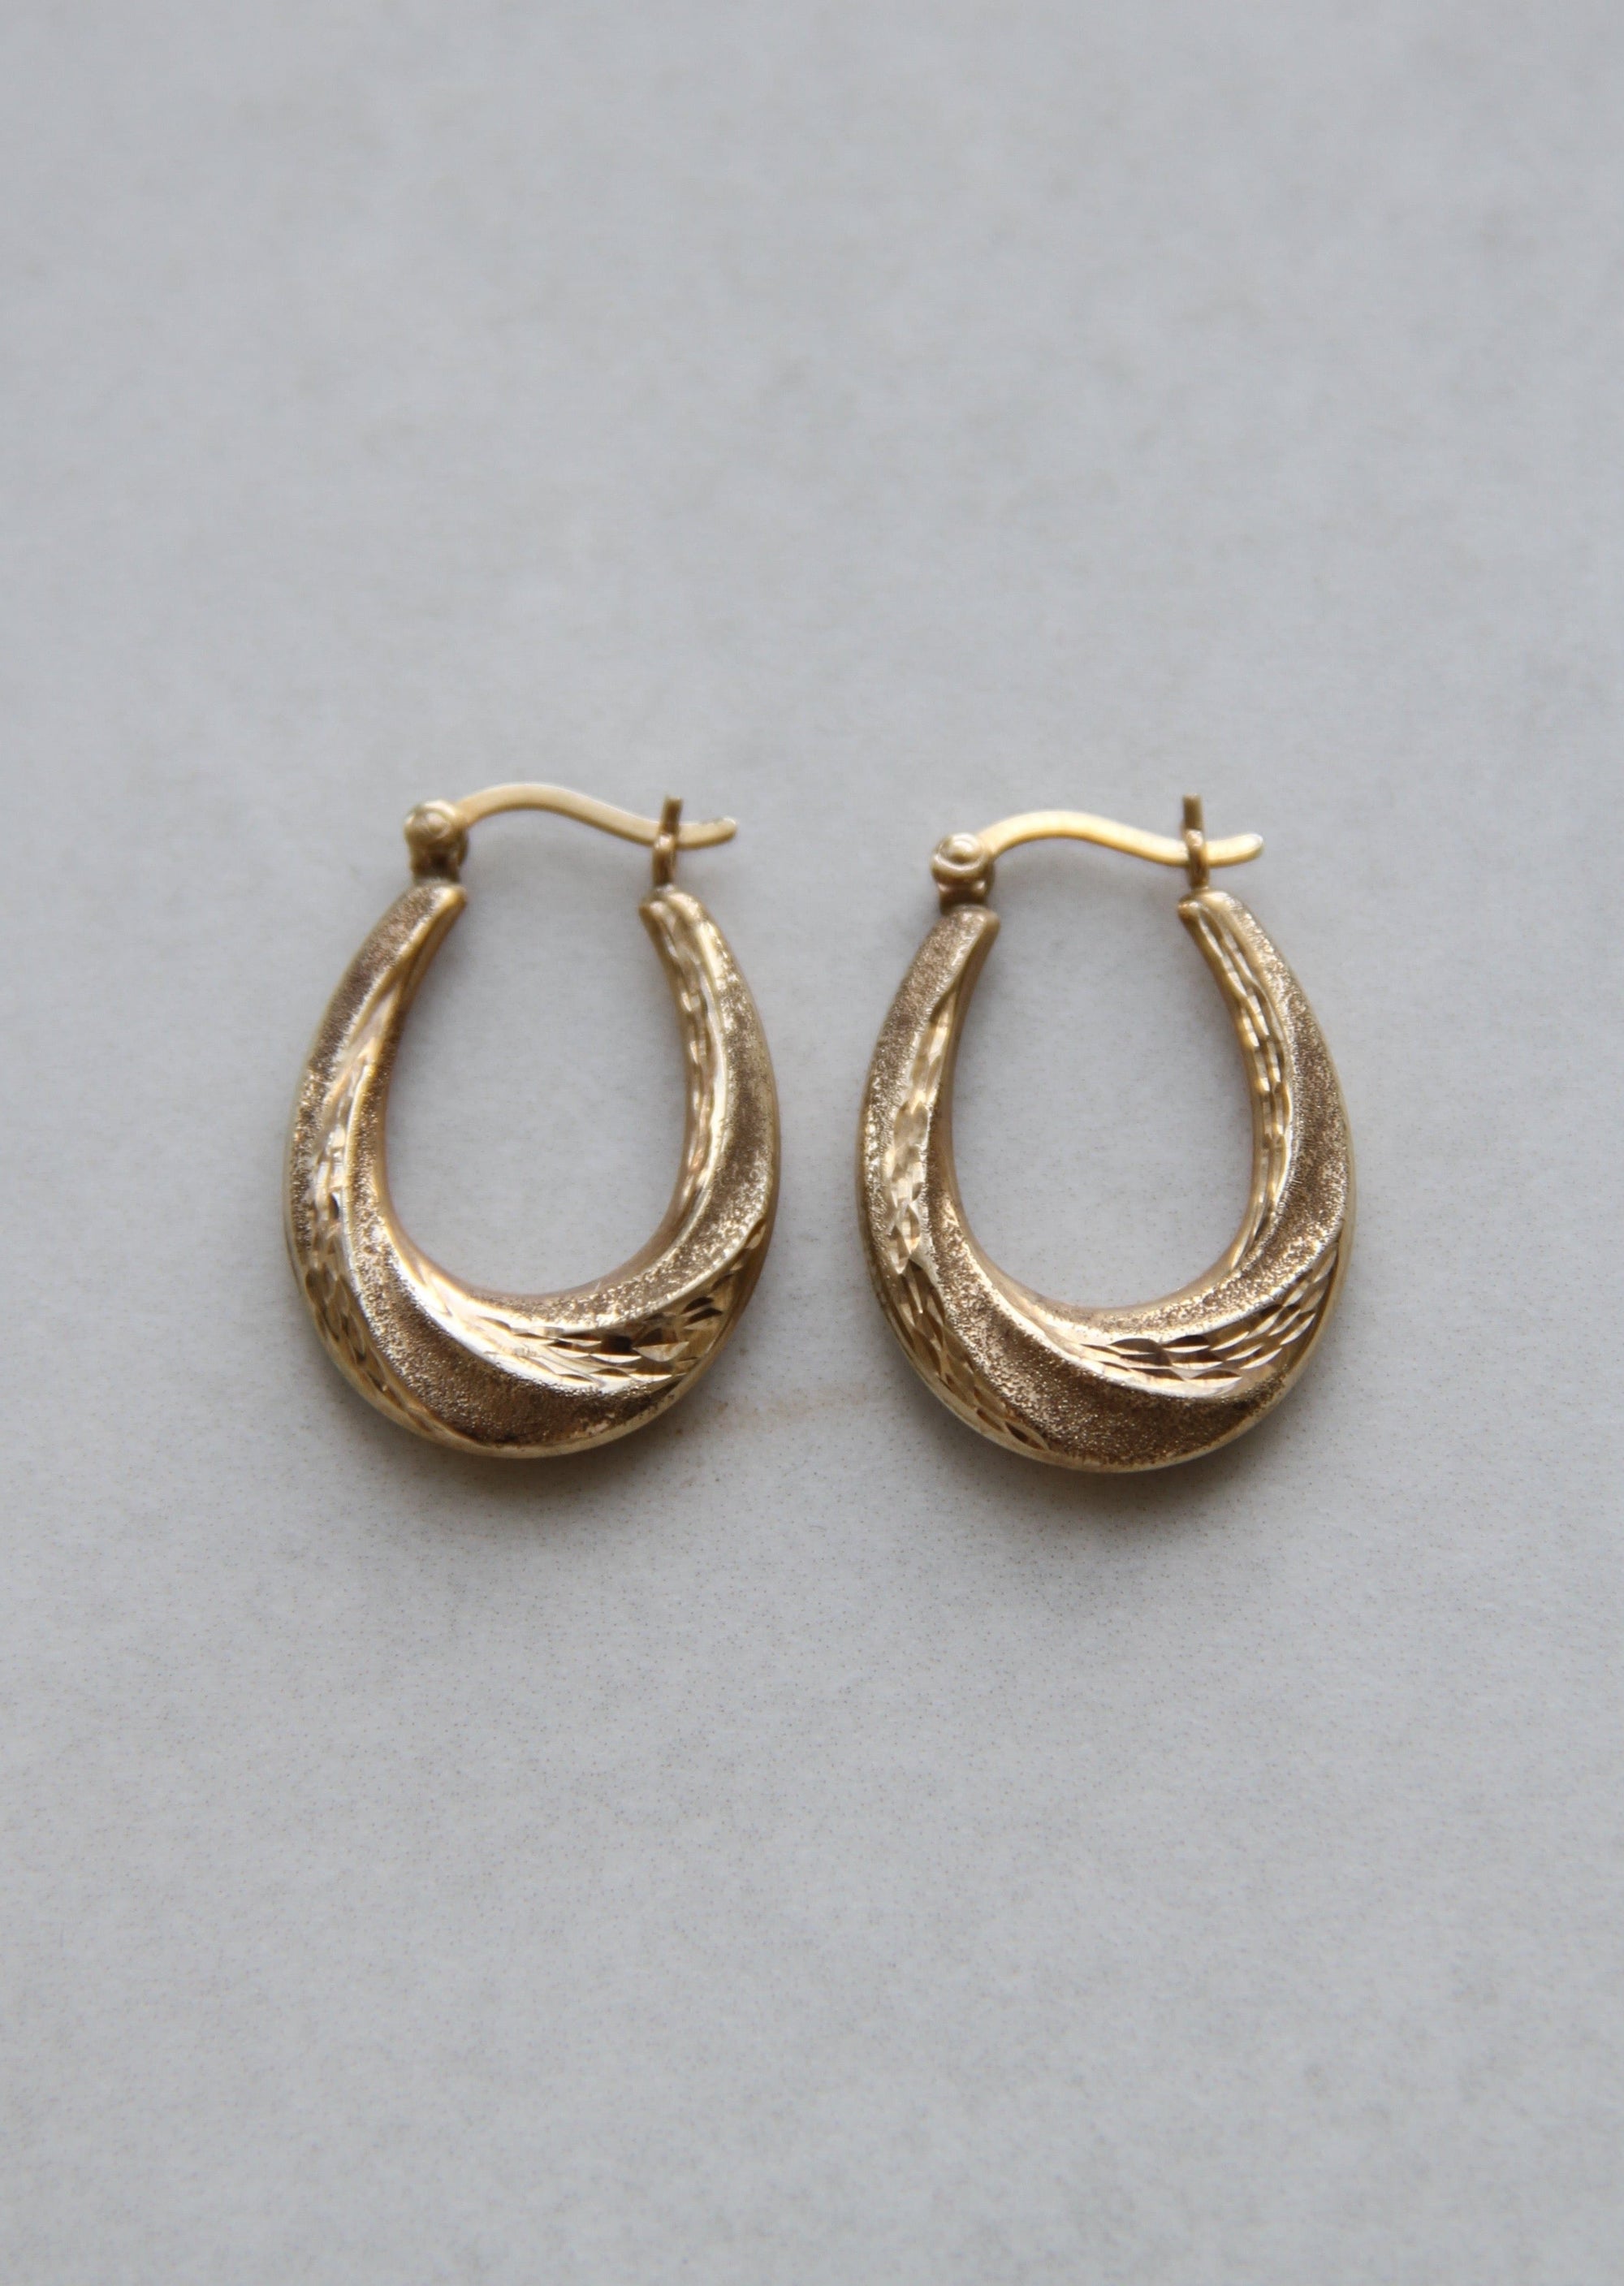 VINTAGE 9CT GOLD OVAL TWIST TEXTURED HOOPS